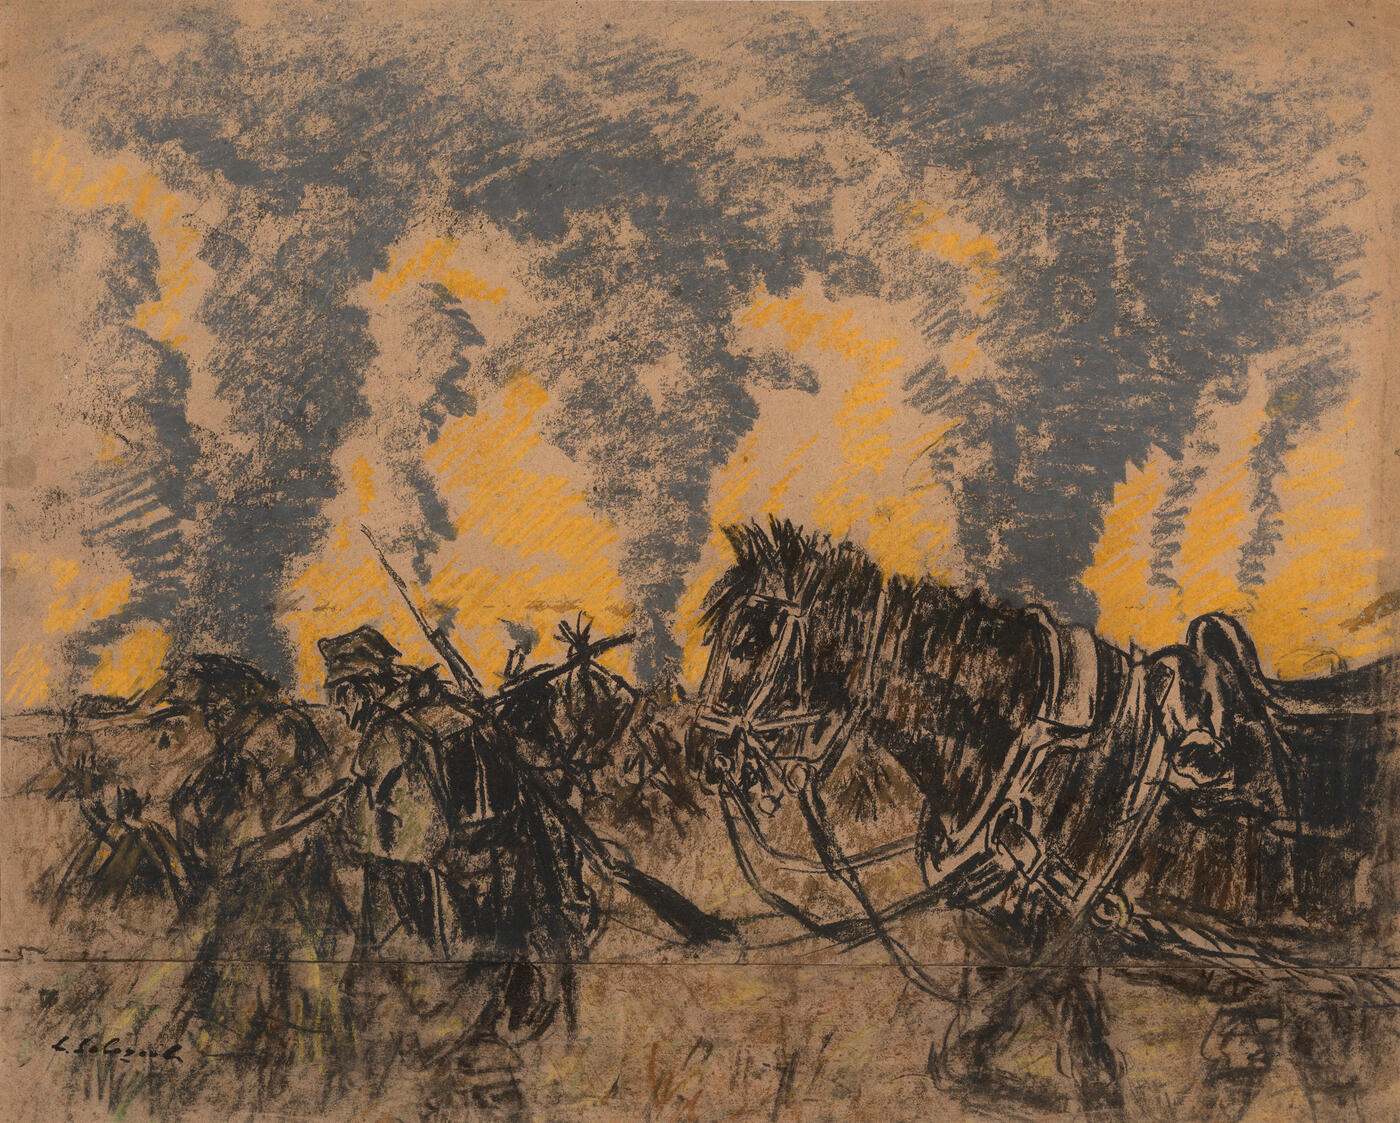 Breakthrough at Lutsk, a Collection of Drawings  from the First World War Series, 18 works